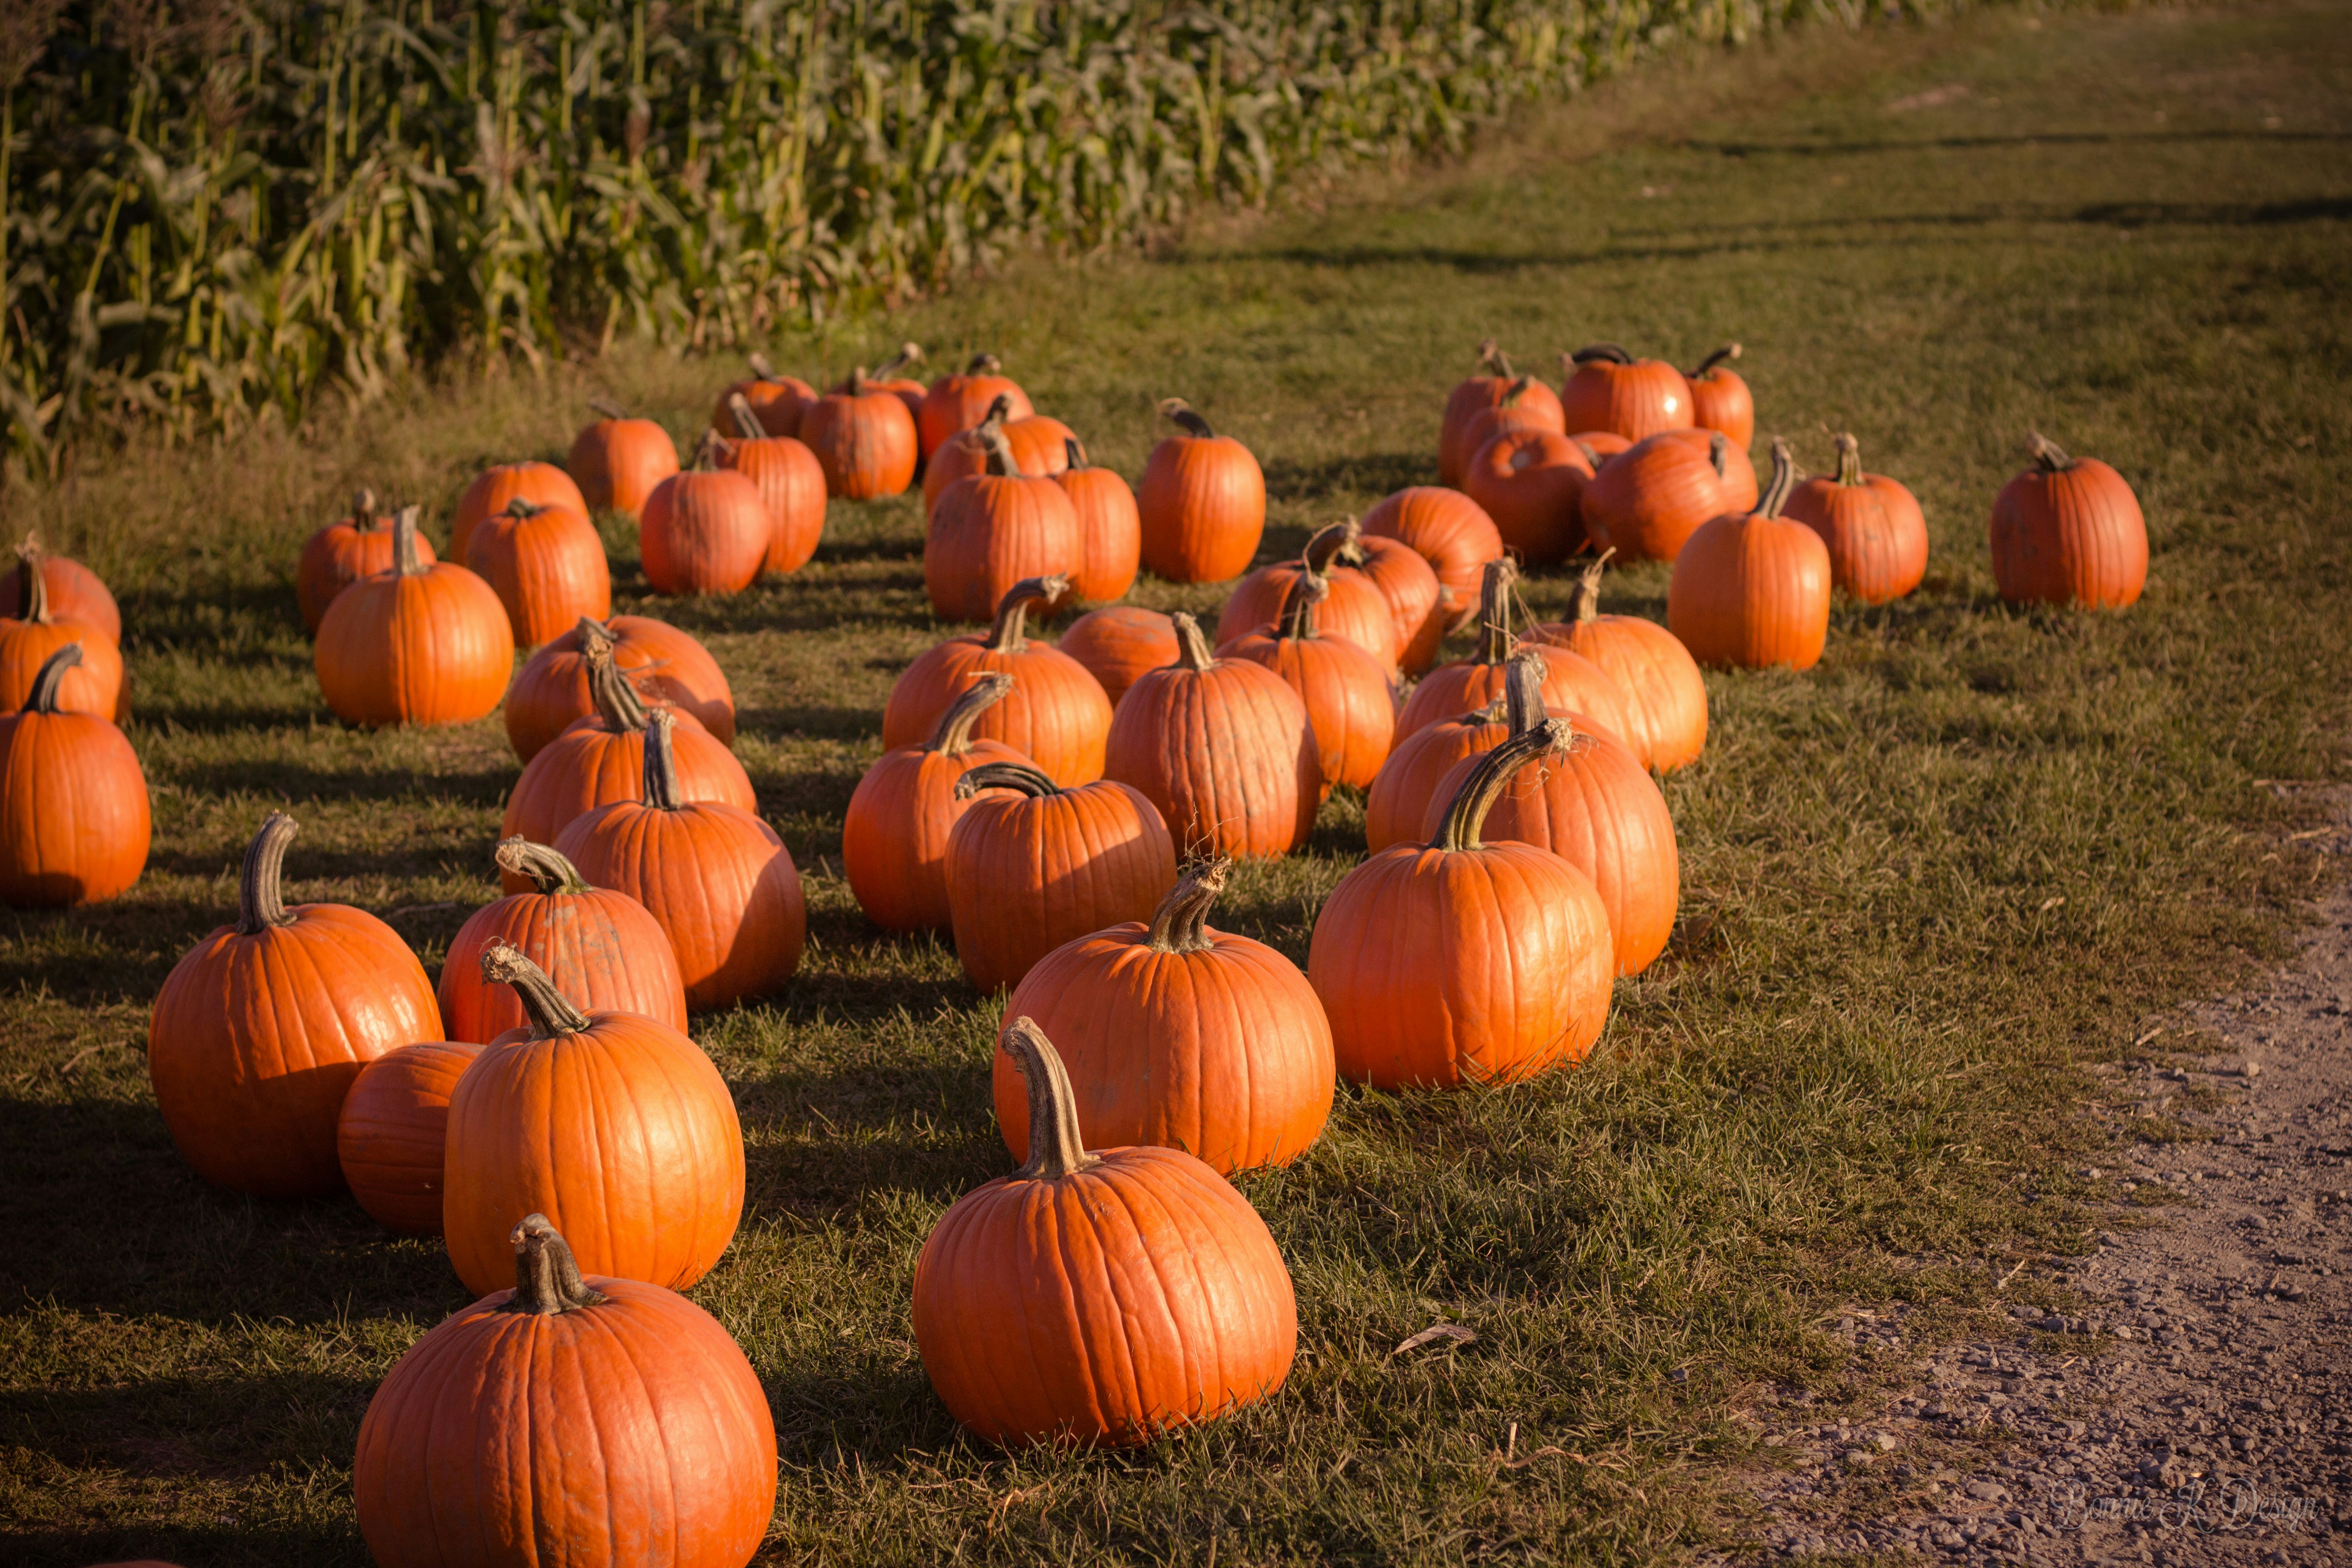 photography of pumpkins on ground at daytime